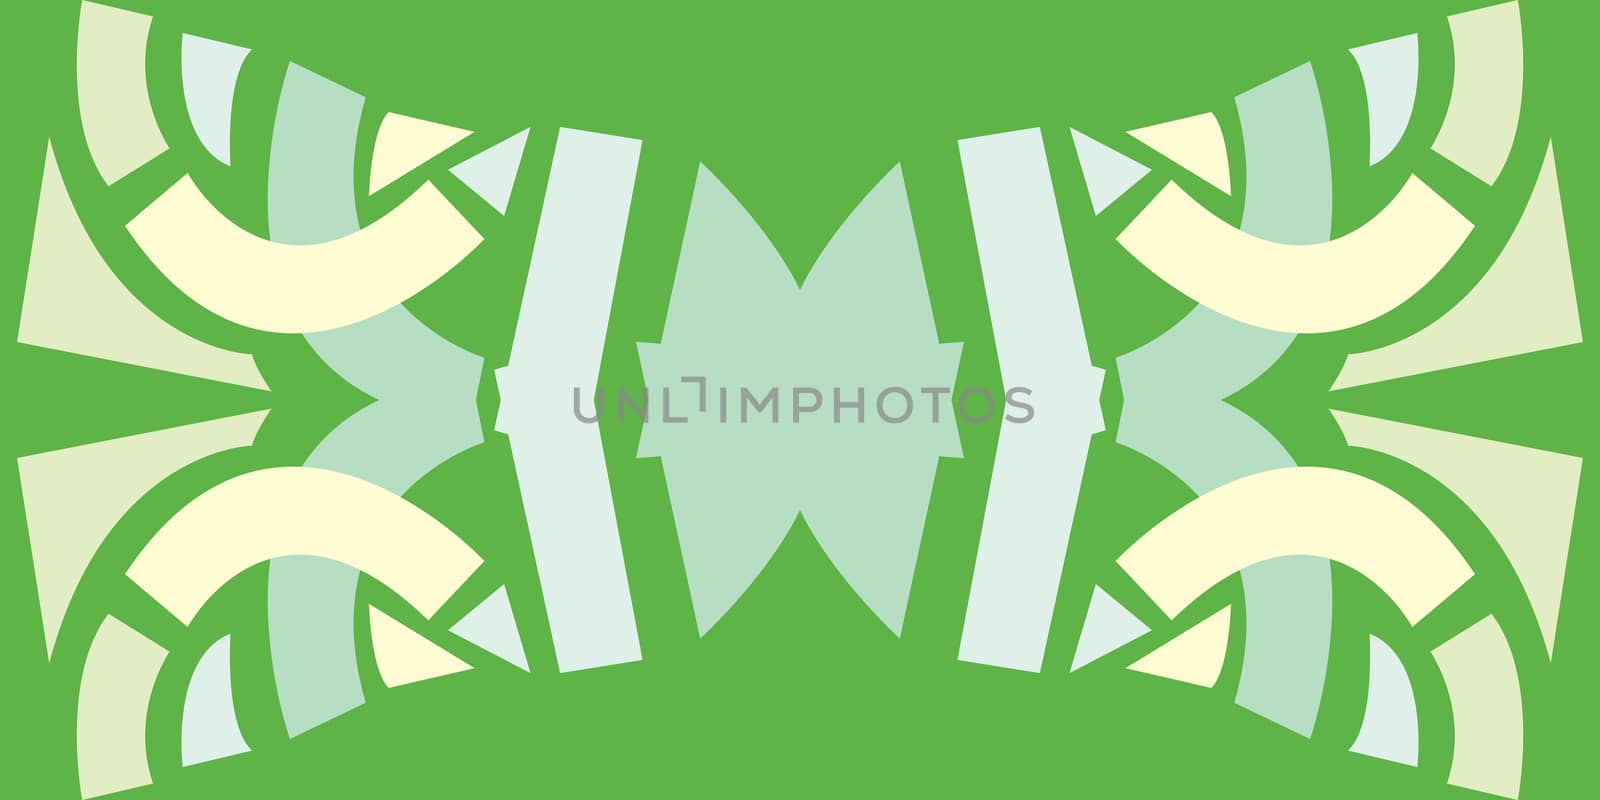 Abstract bow tie design over green background